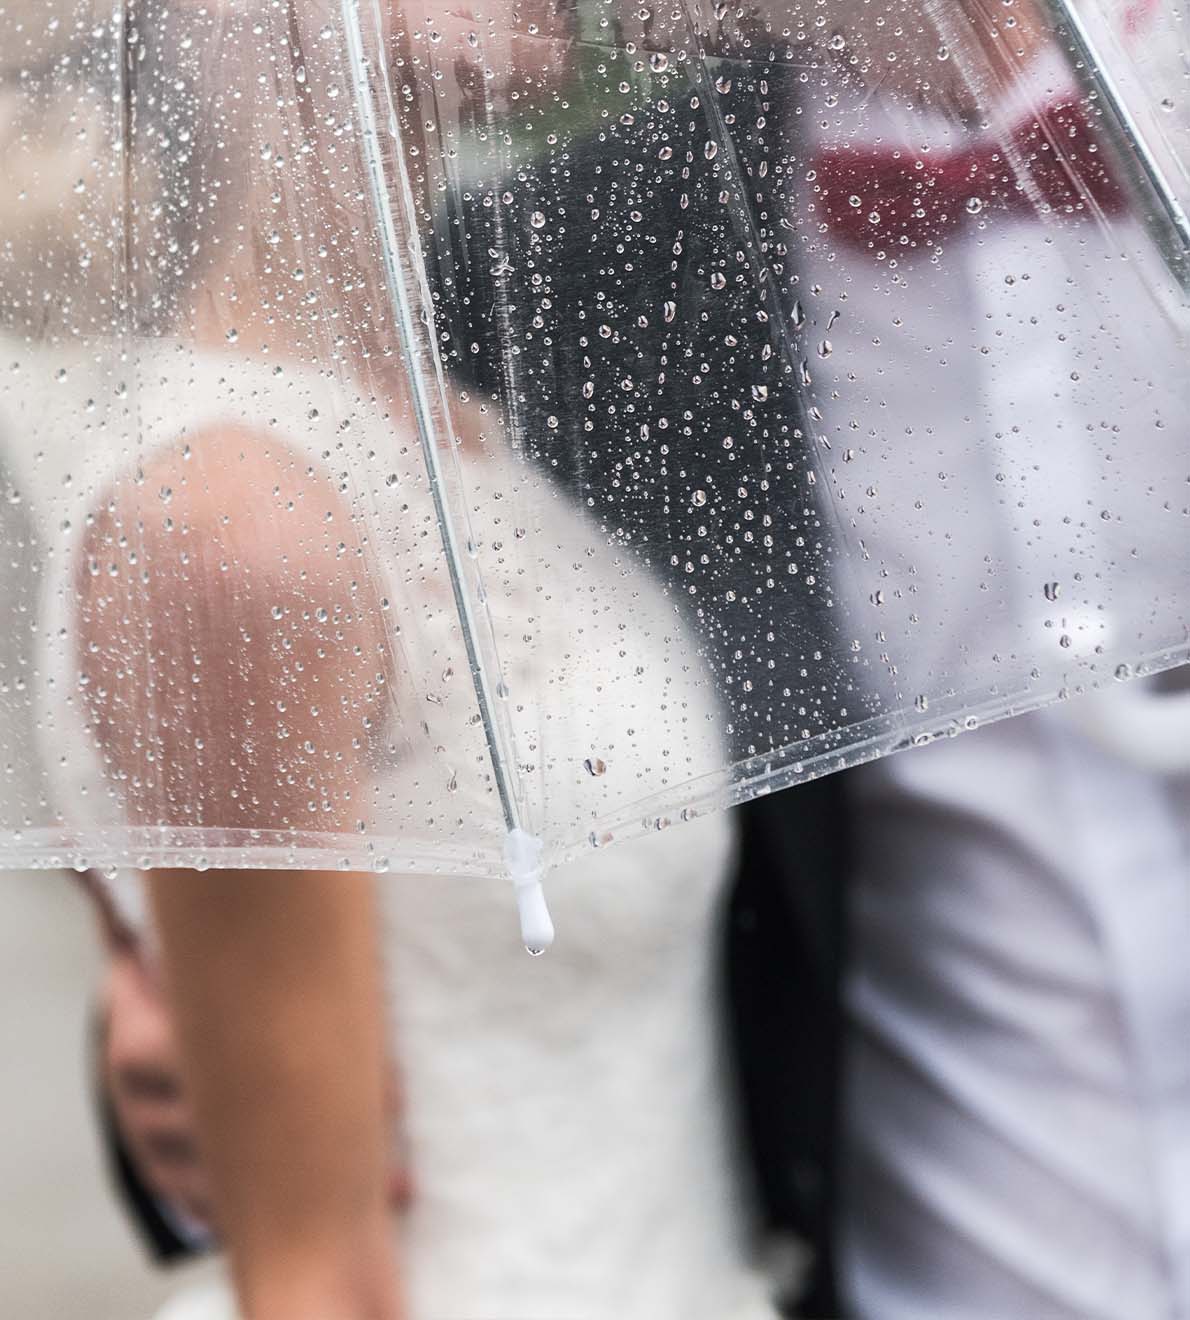 Image of a wet umbrella, representing the contingency plans for wet weather at weddings, a topic addressed in the FAQs on Ash Reynolds' site.